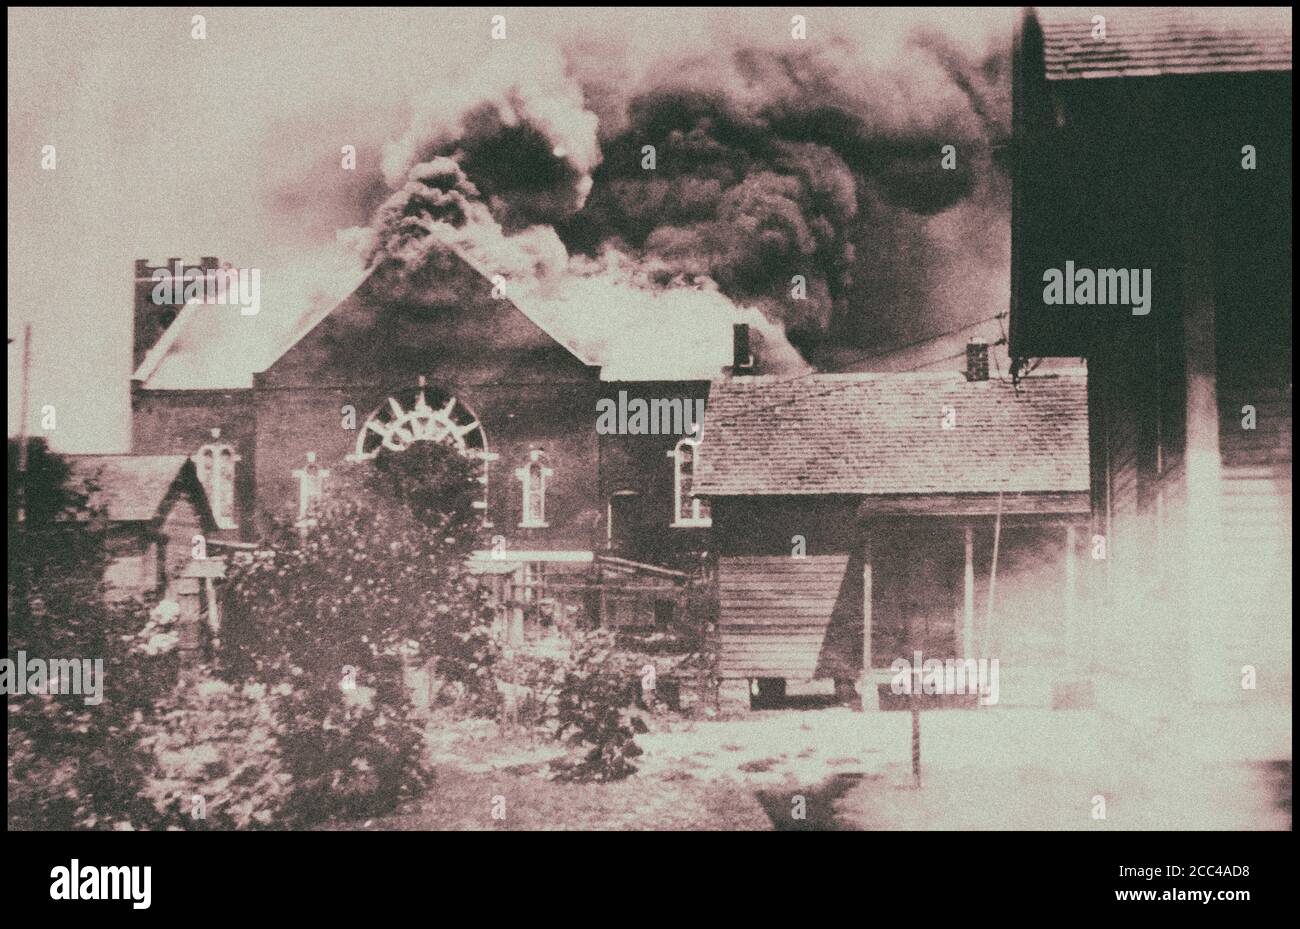 Burning of church where ammunition was stored during race riot, Tulsa, Oklahoma. USA. June 1, 1921 Stock Photo